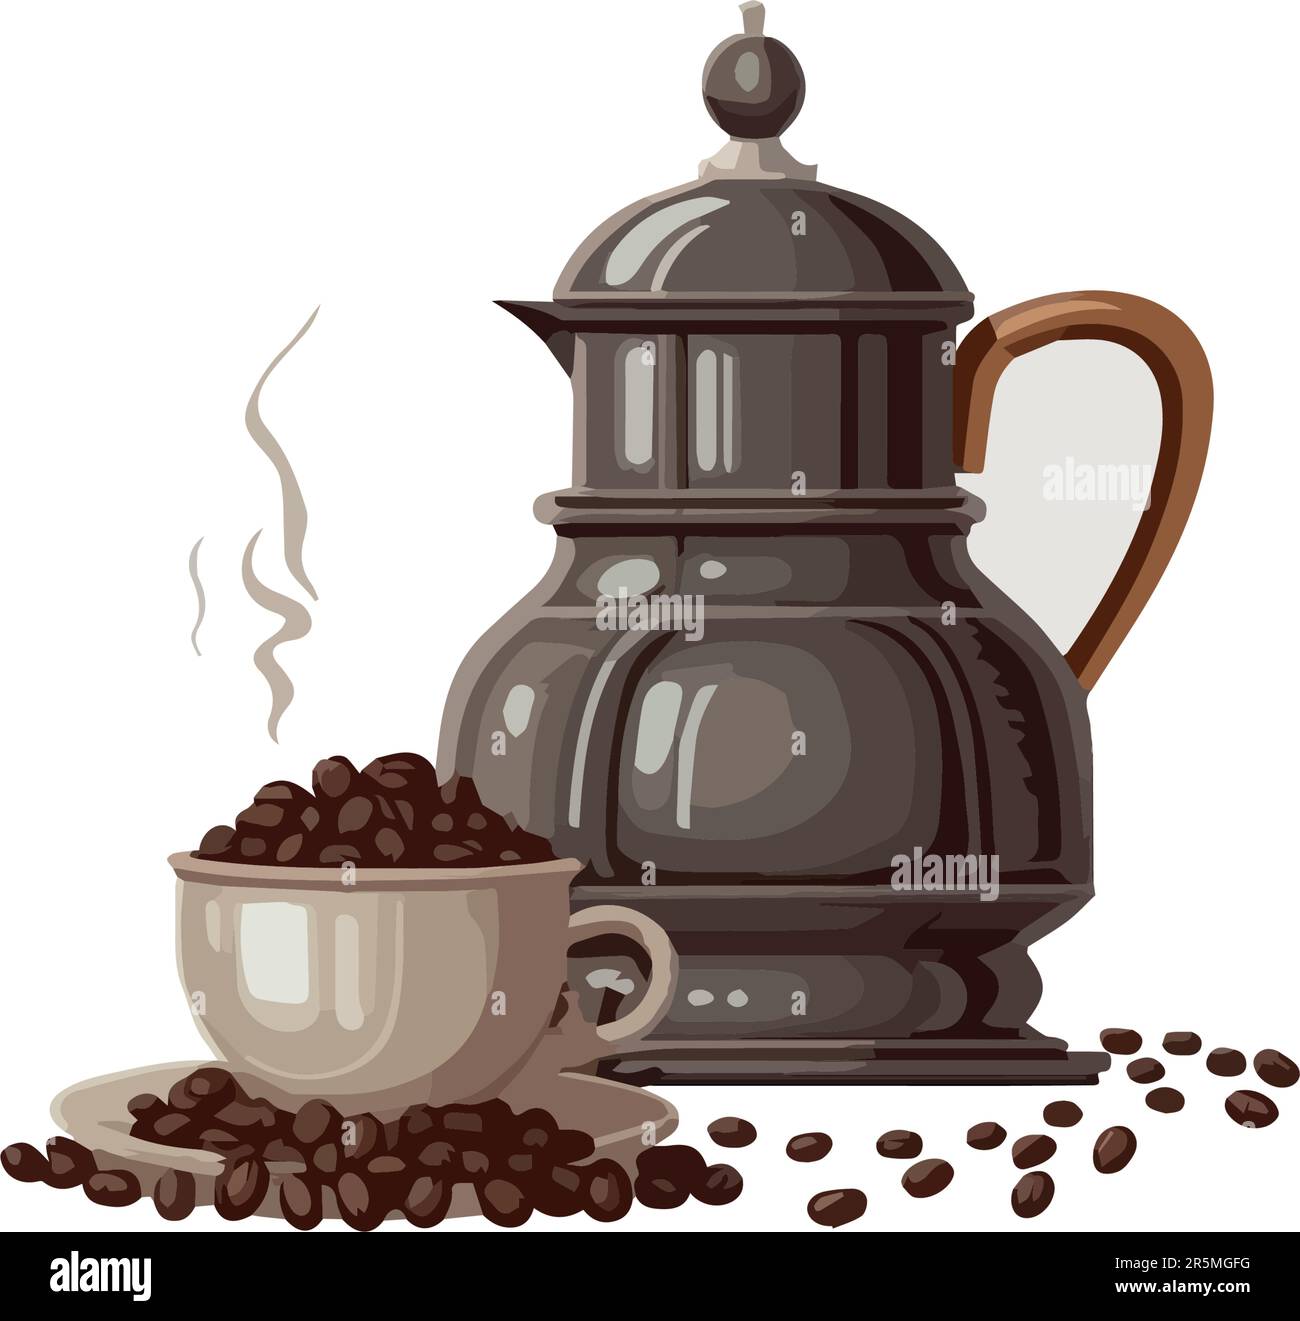 https://c8.alamy.com/comp/2R5MGFG/set-with-coffee-beans-and-coffee-grinders-and-cup-2R5MGFG.jpg